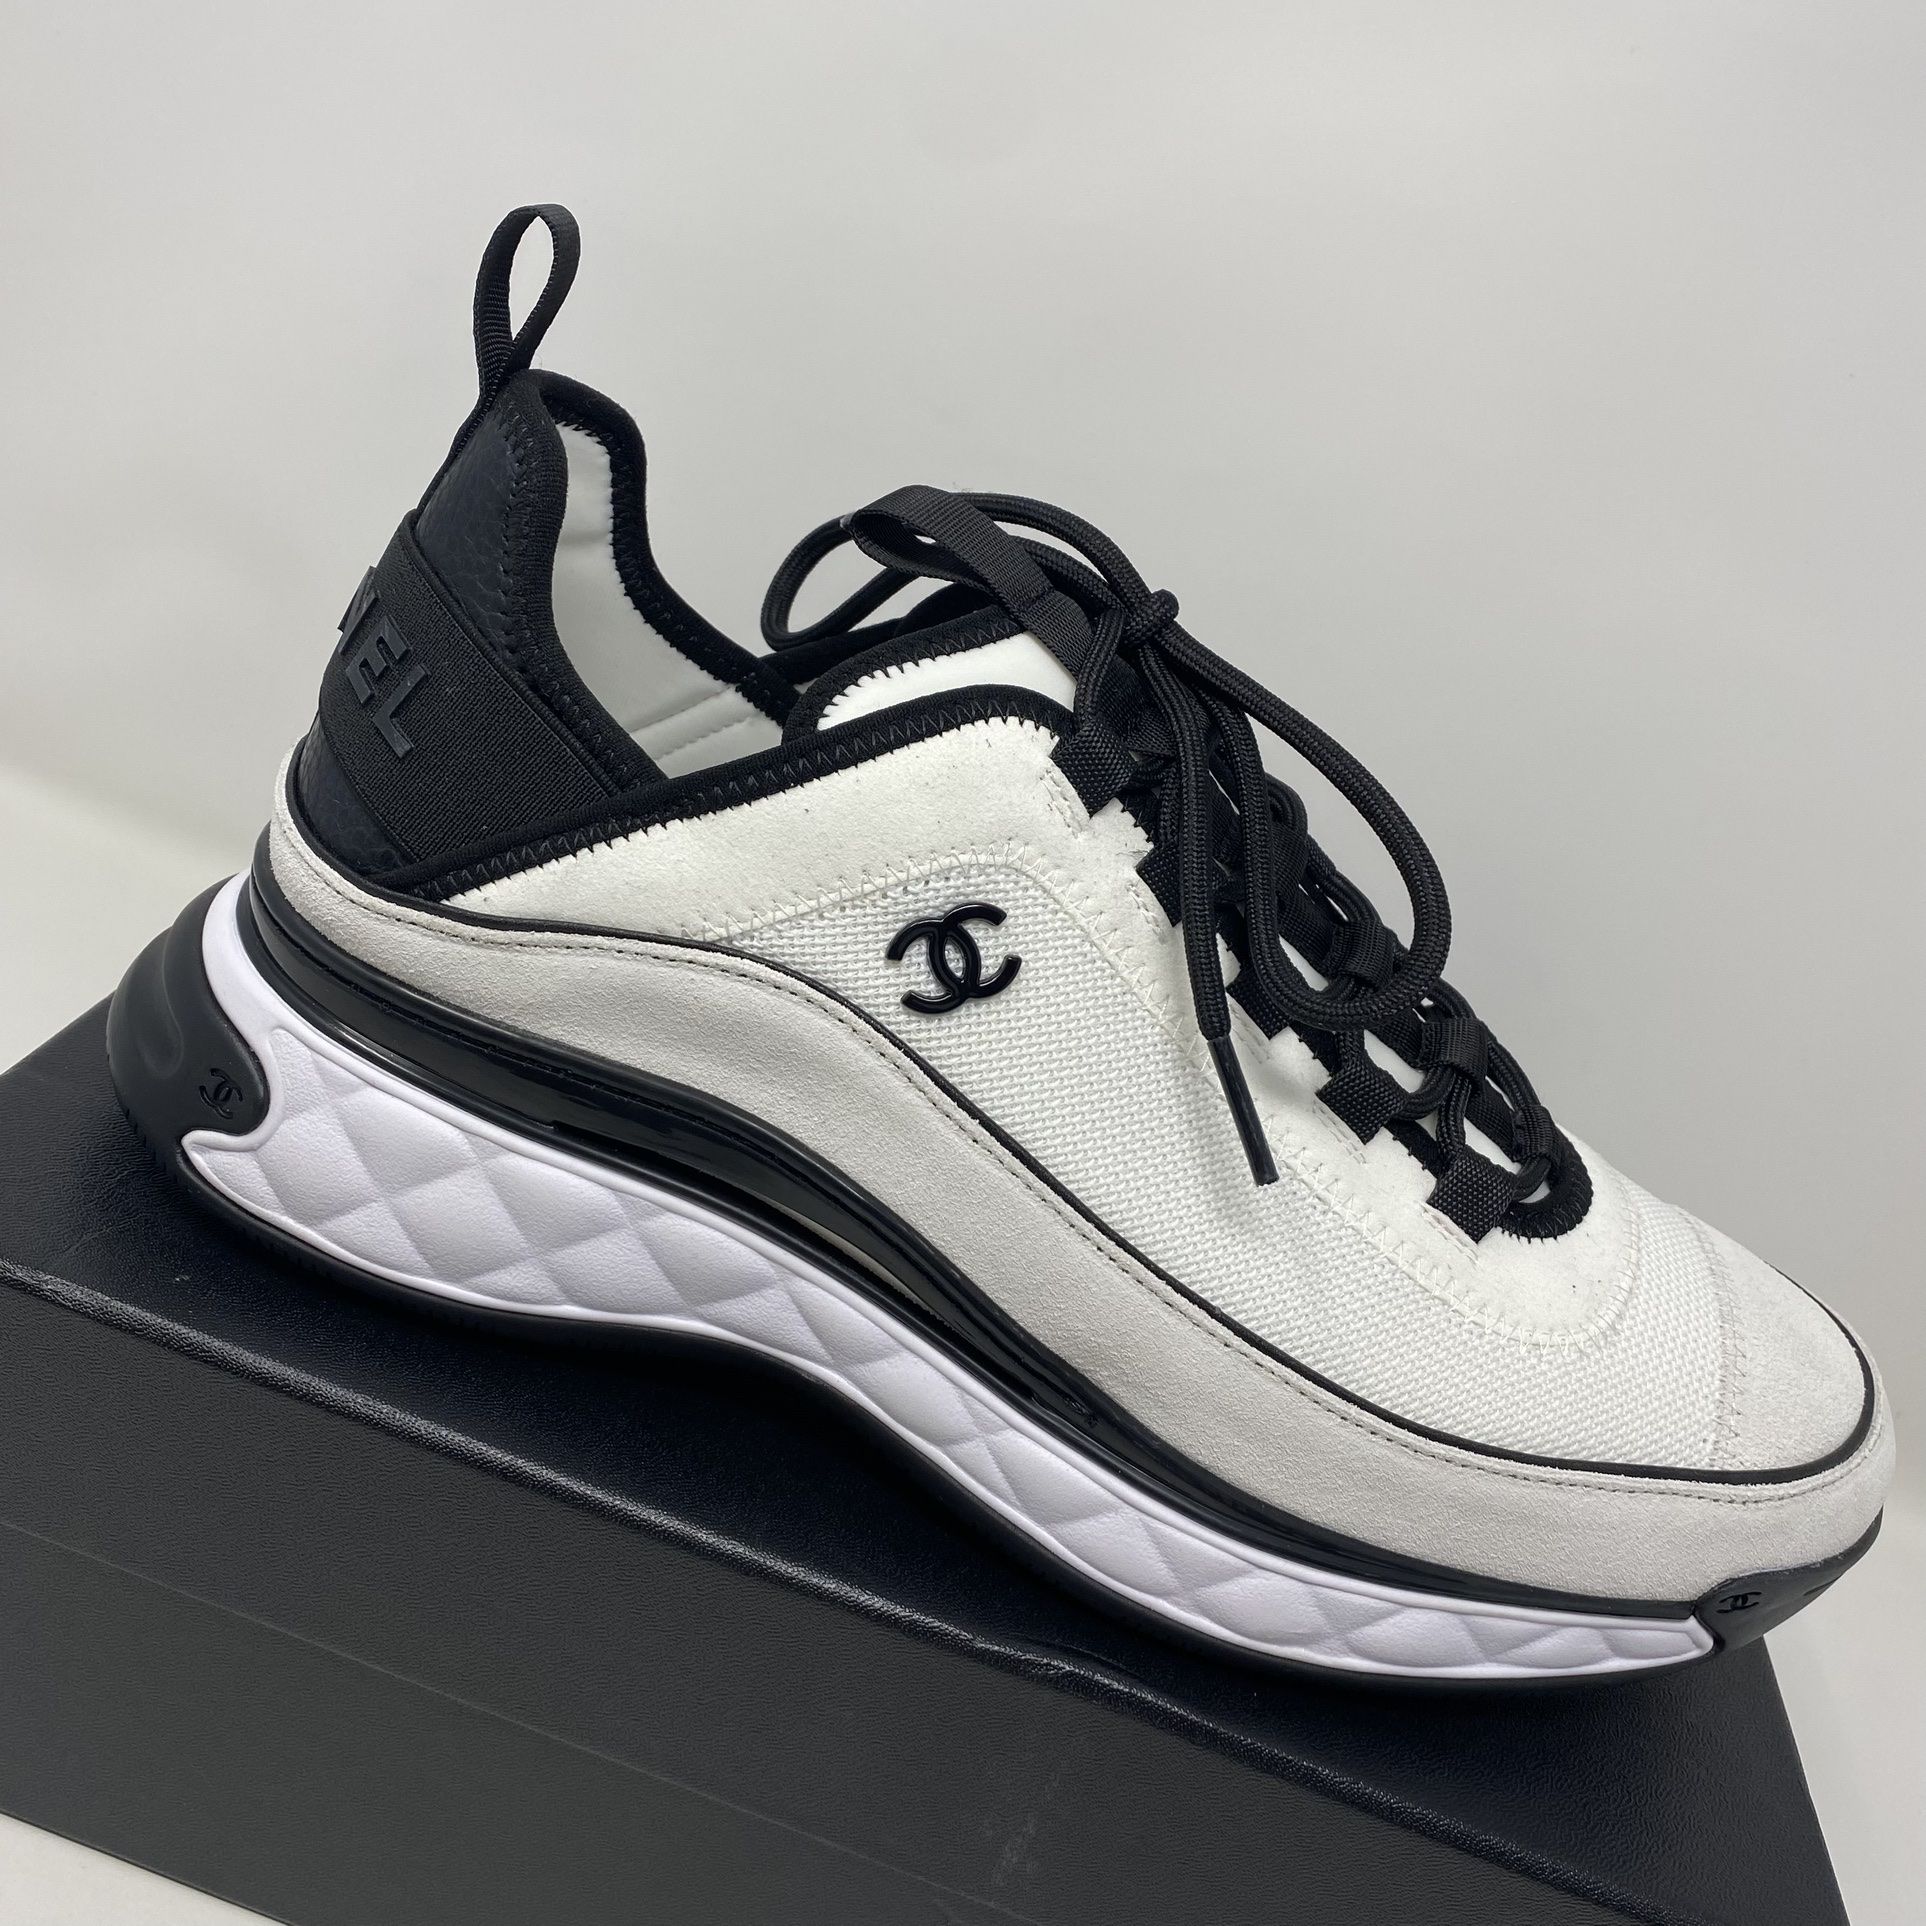 Chanel Brand New Tennis Shoes for Sale in Vallejo, CA - OfferUp